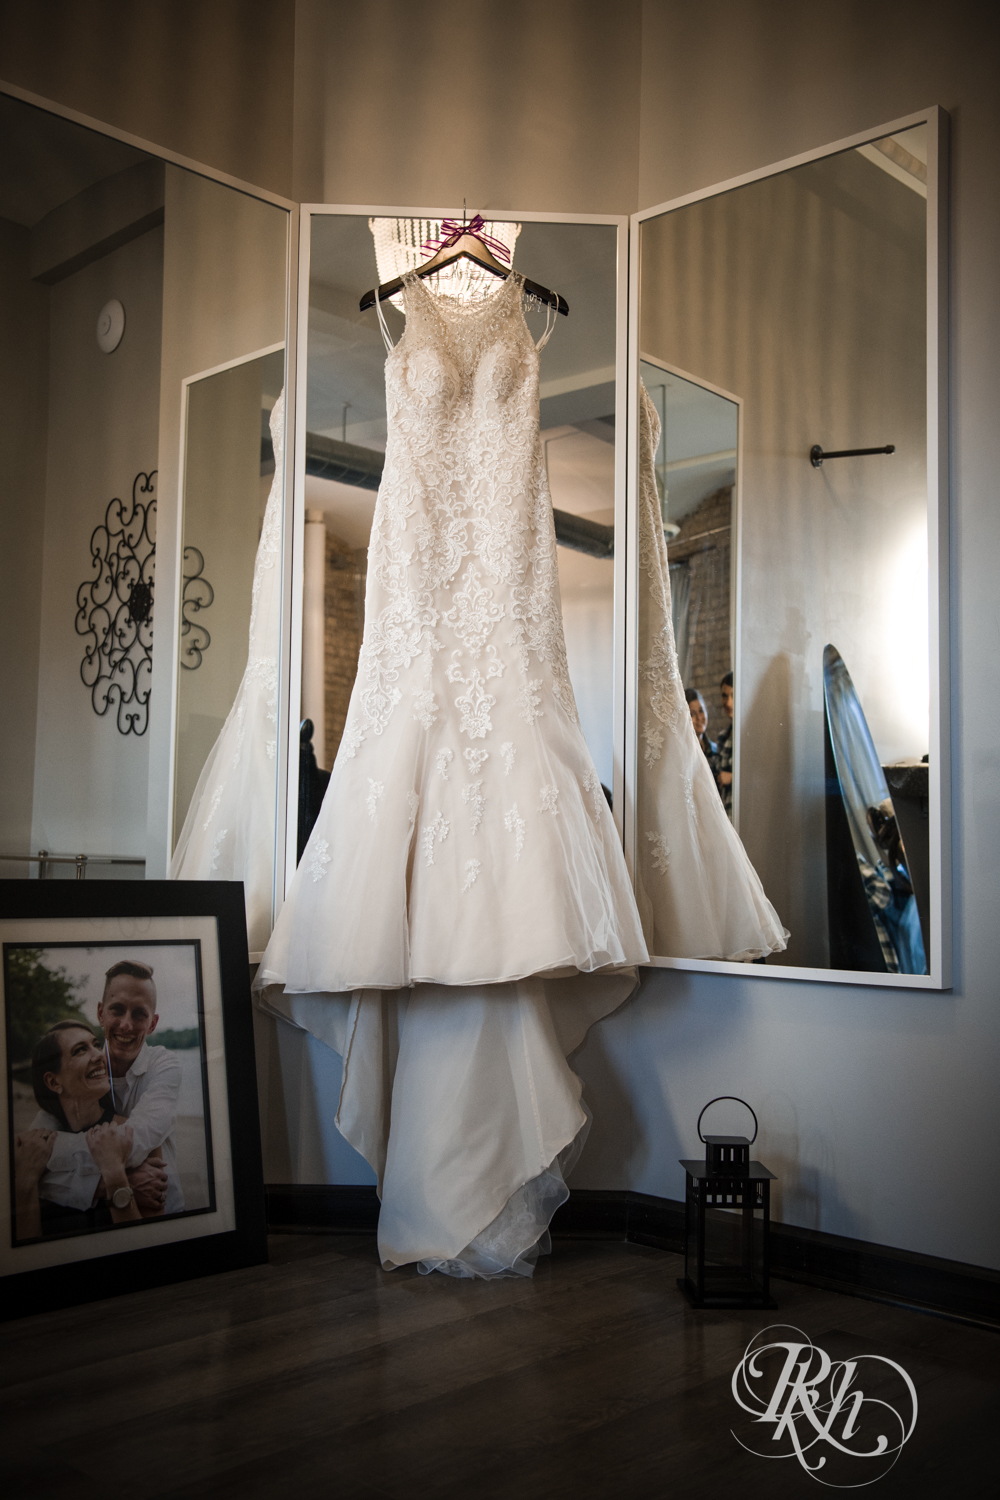 Wedding dress hung on mirror in the Lumber Exchange Event Center in Minneapolis, Minnesota.